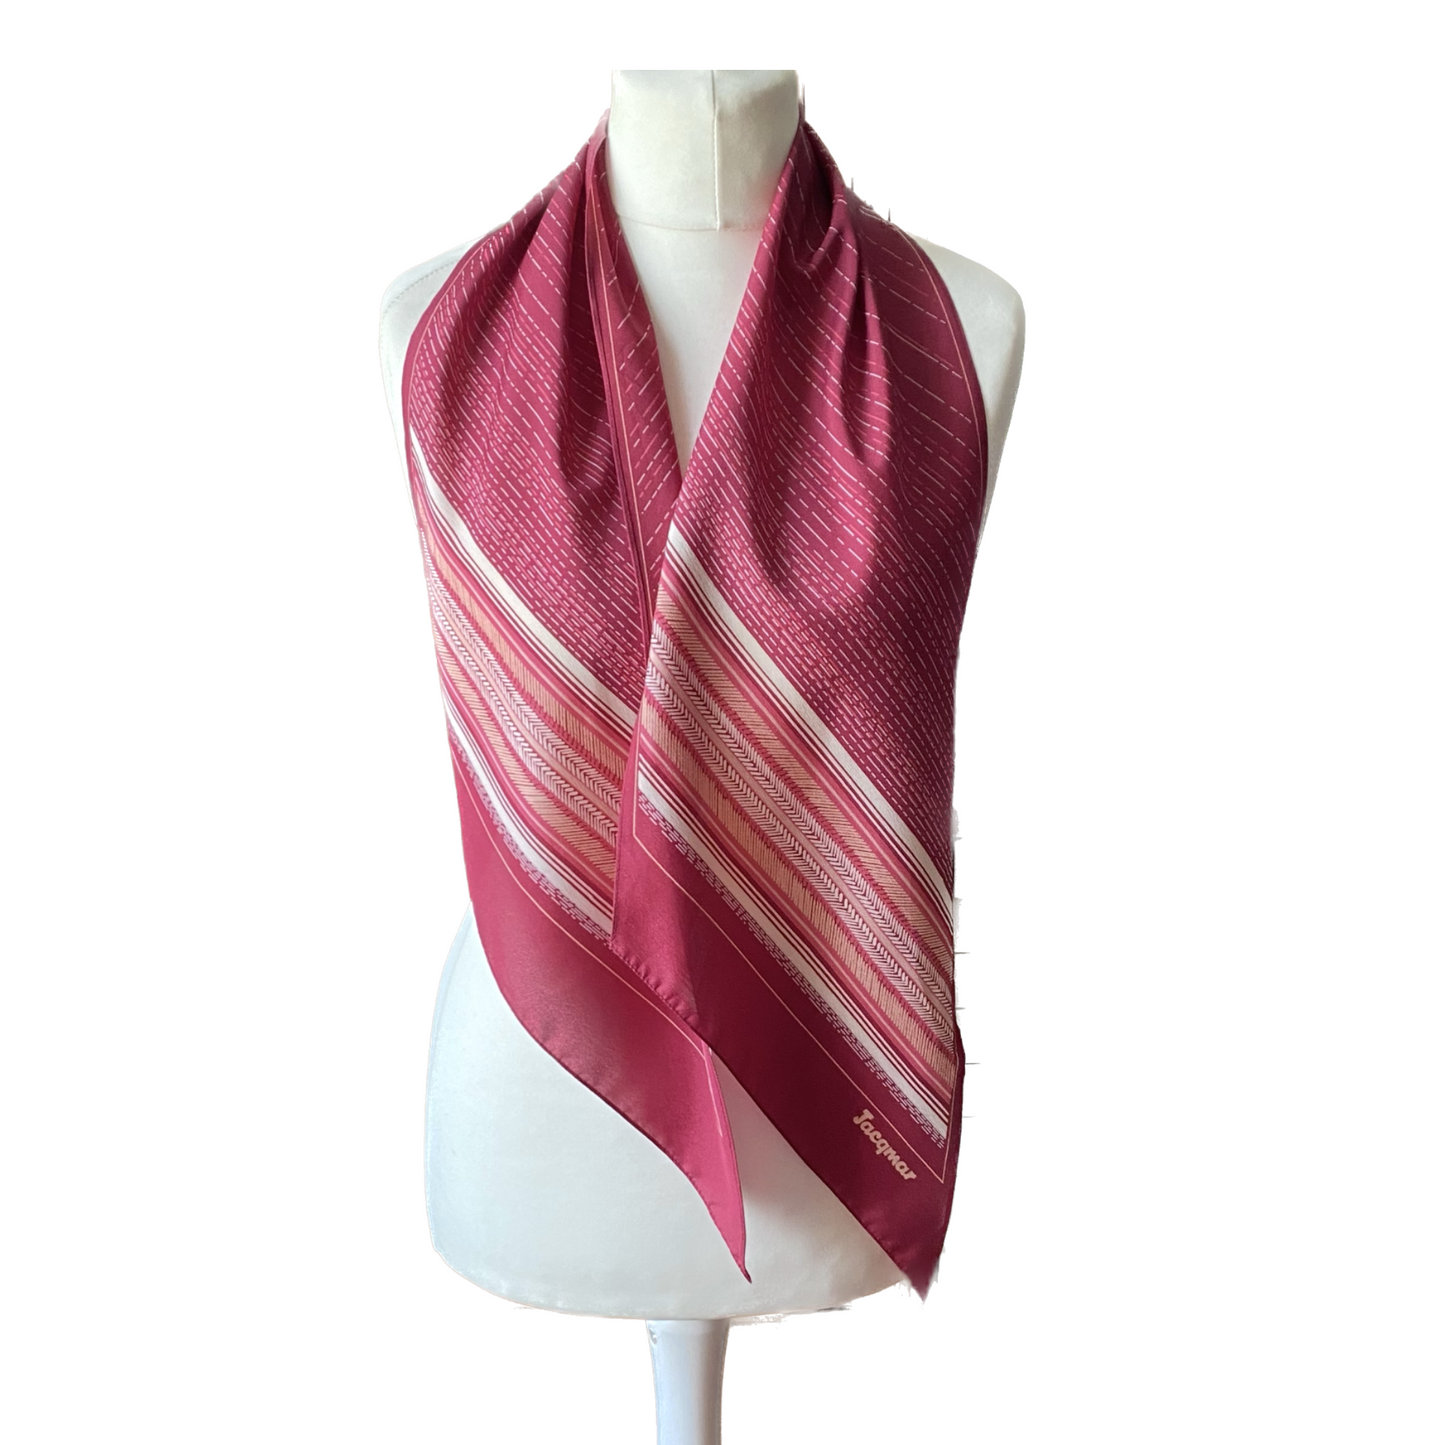 Vintage Jacqmar  scarf - Luxurious and comfortable to wear.